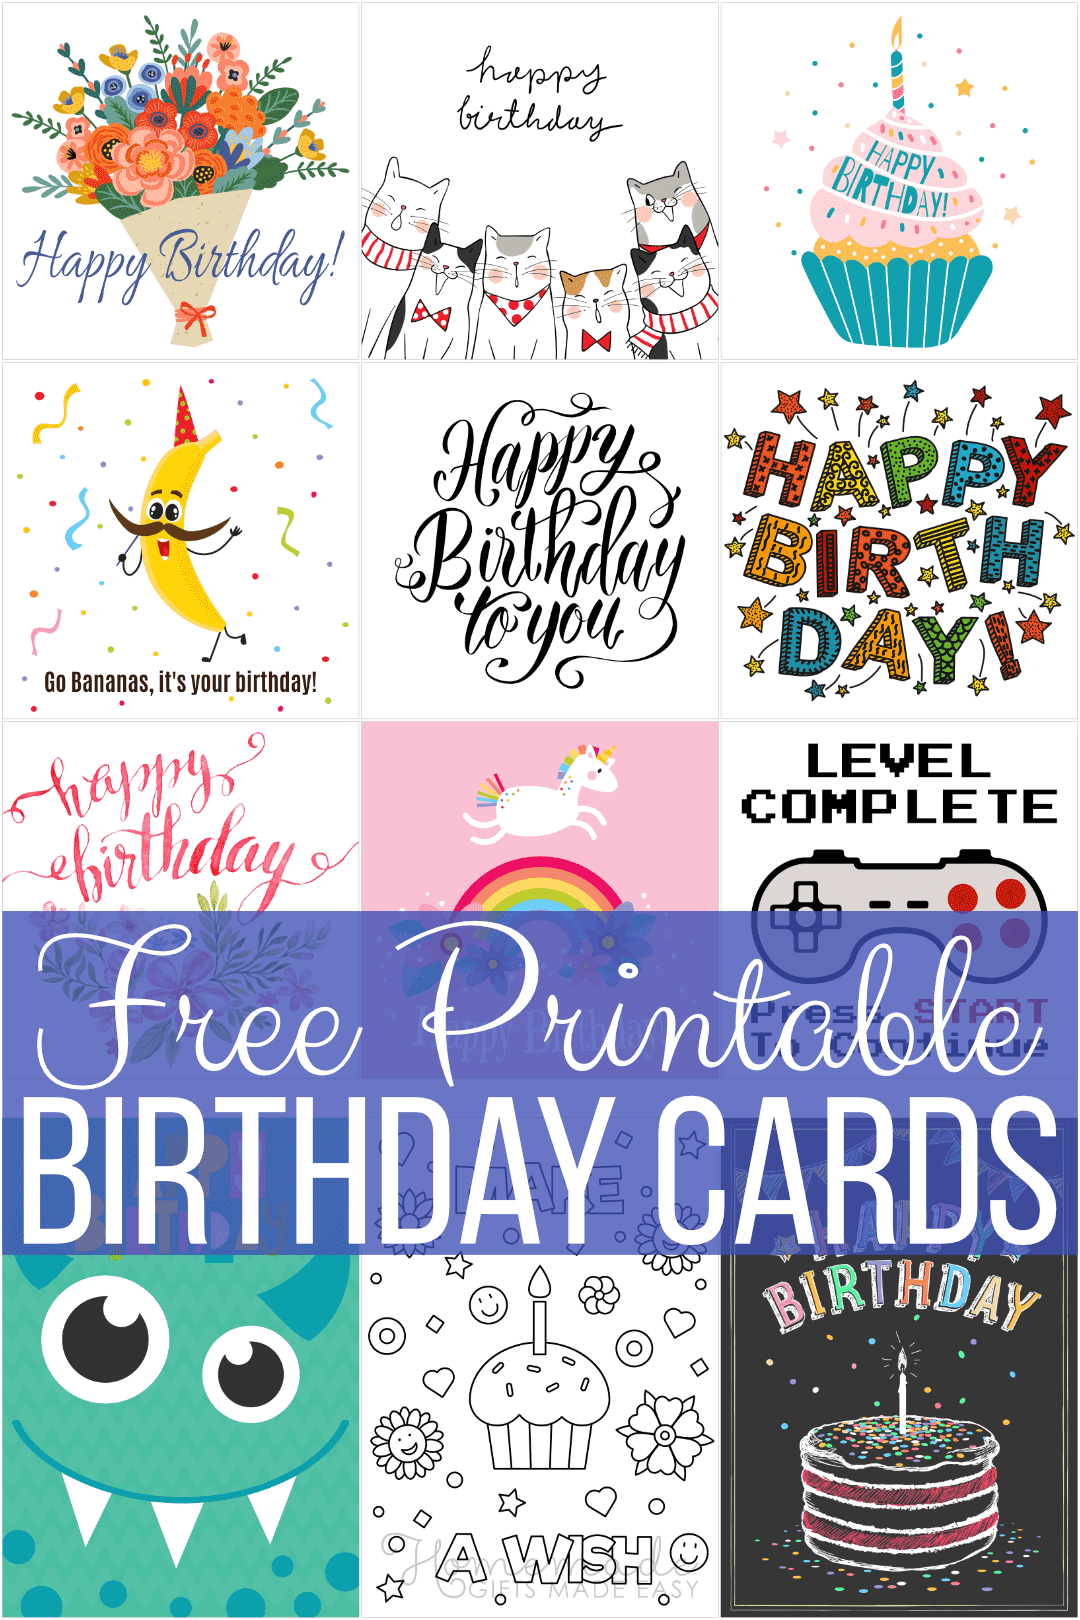 Free Printable Birthday Cards For Everyone - Free Printable Birthday Cards For Kids